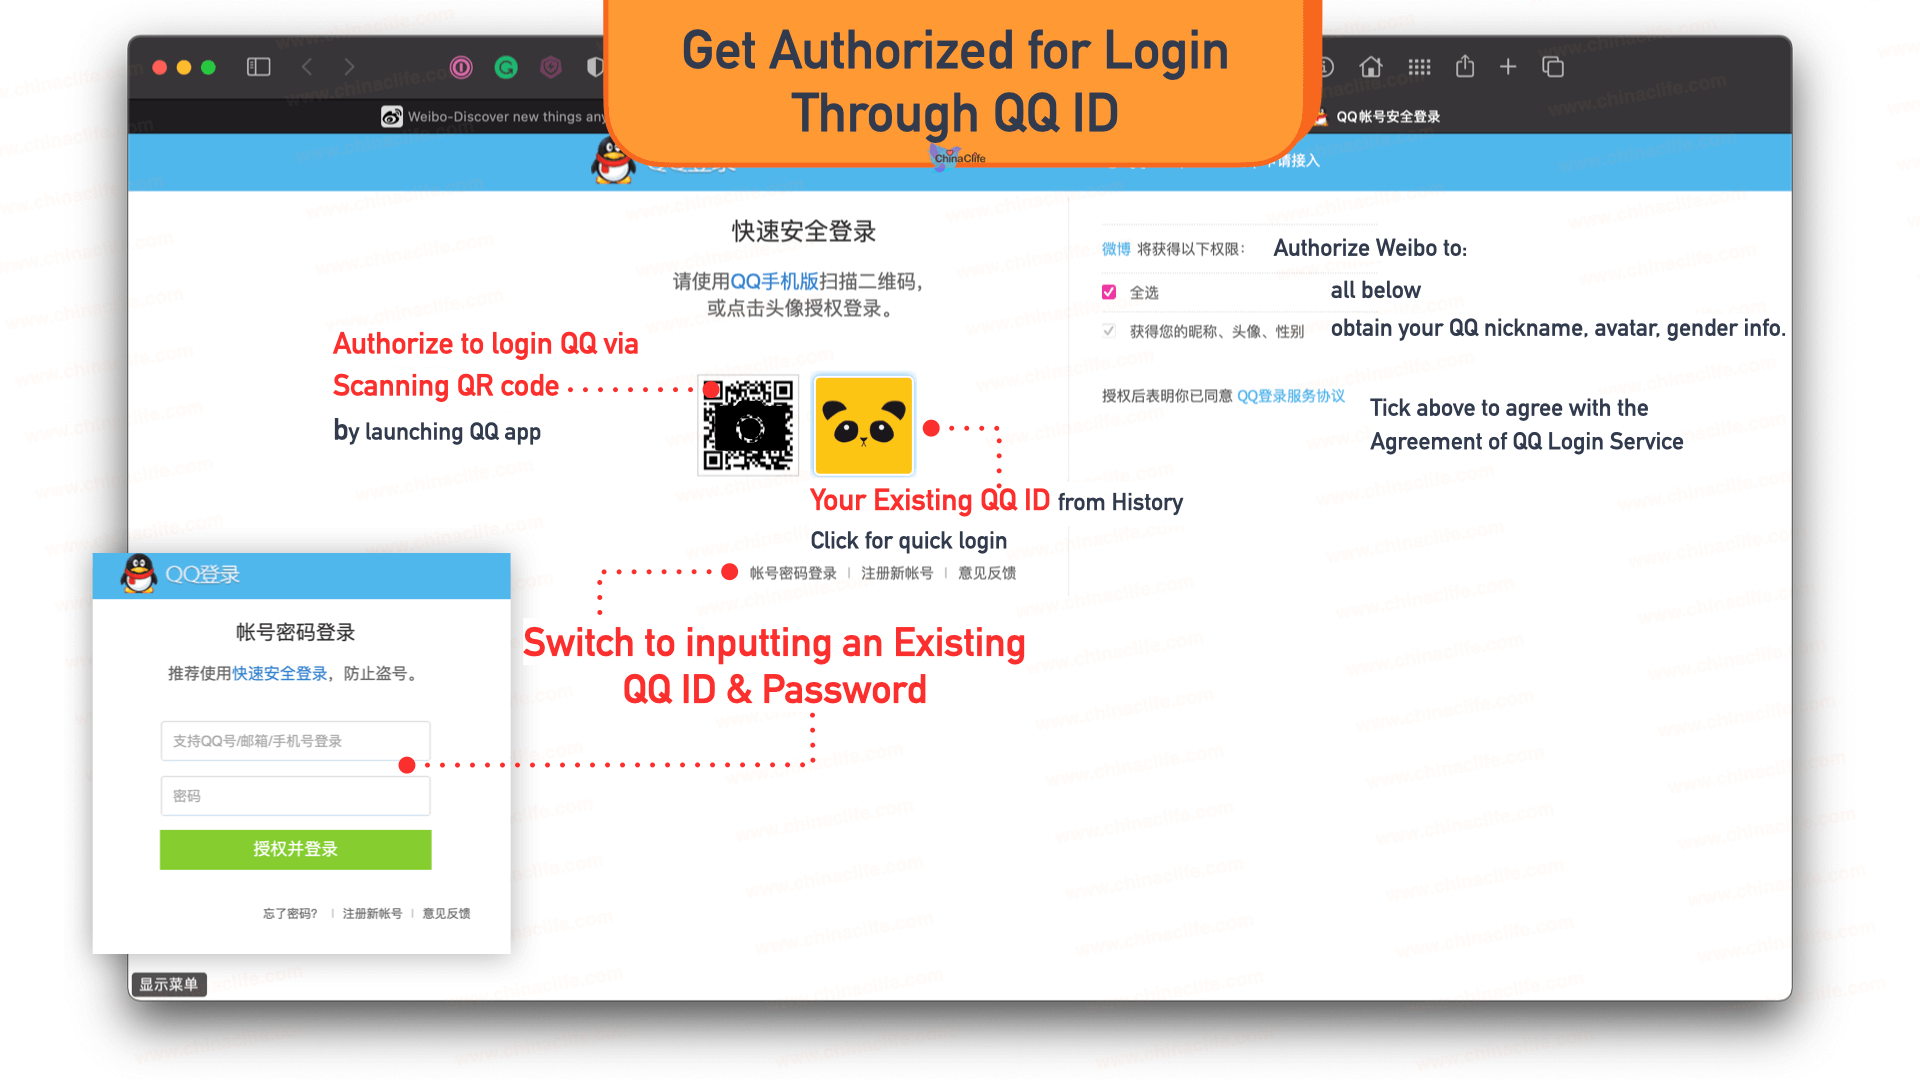 Id wechat qq login with Set up